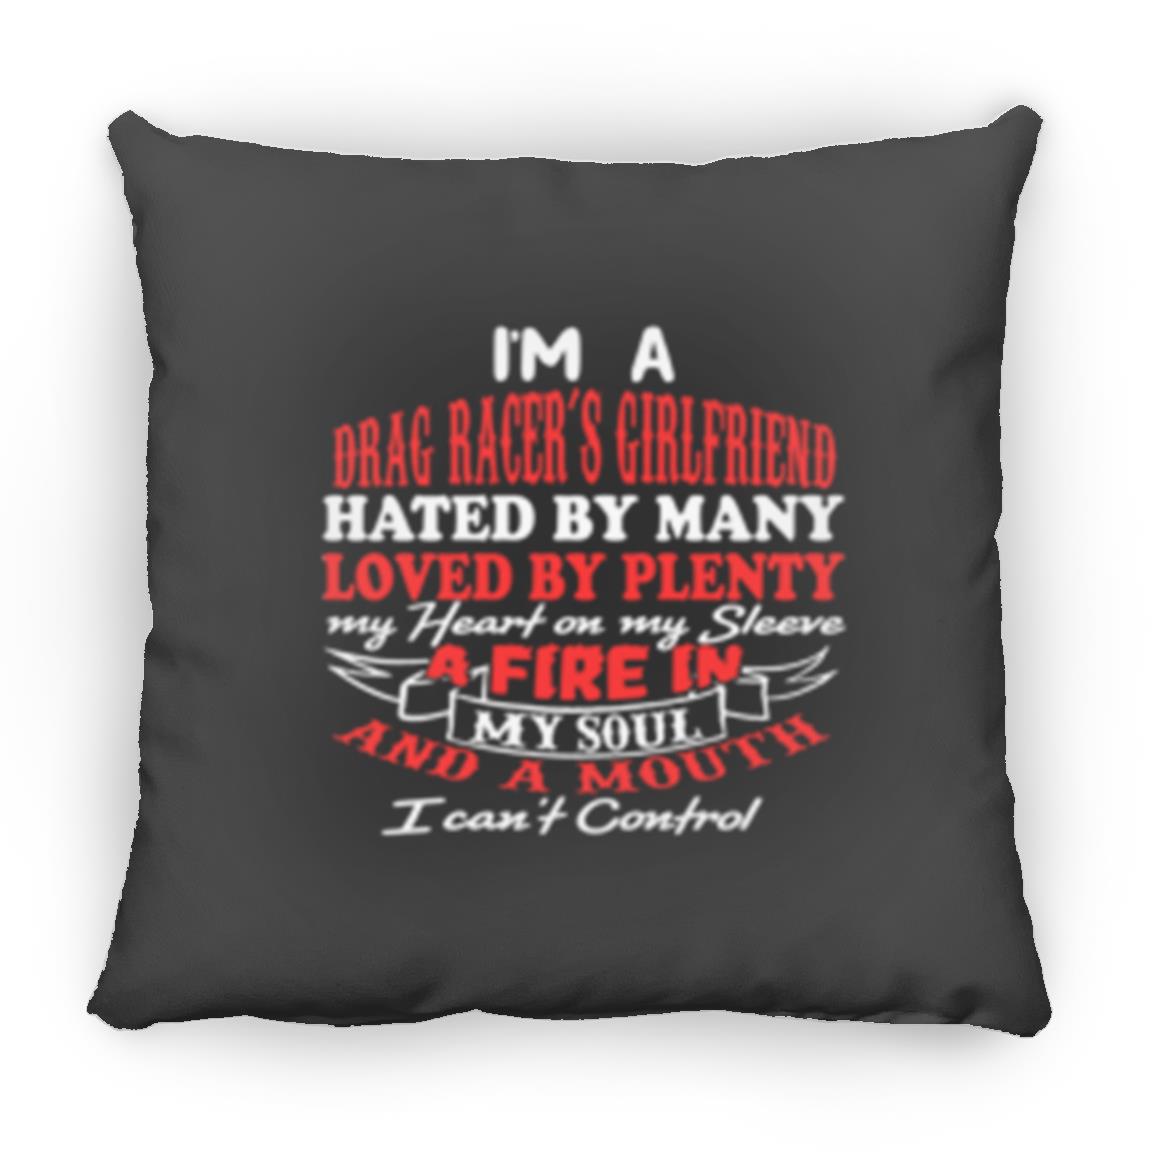 I'm A Drag Racer's Girlfriend Hated By Many Loved By Plenty Large Square Pillow